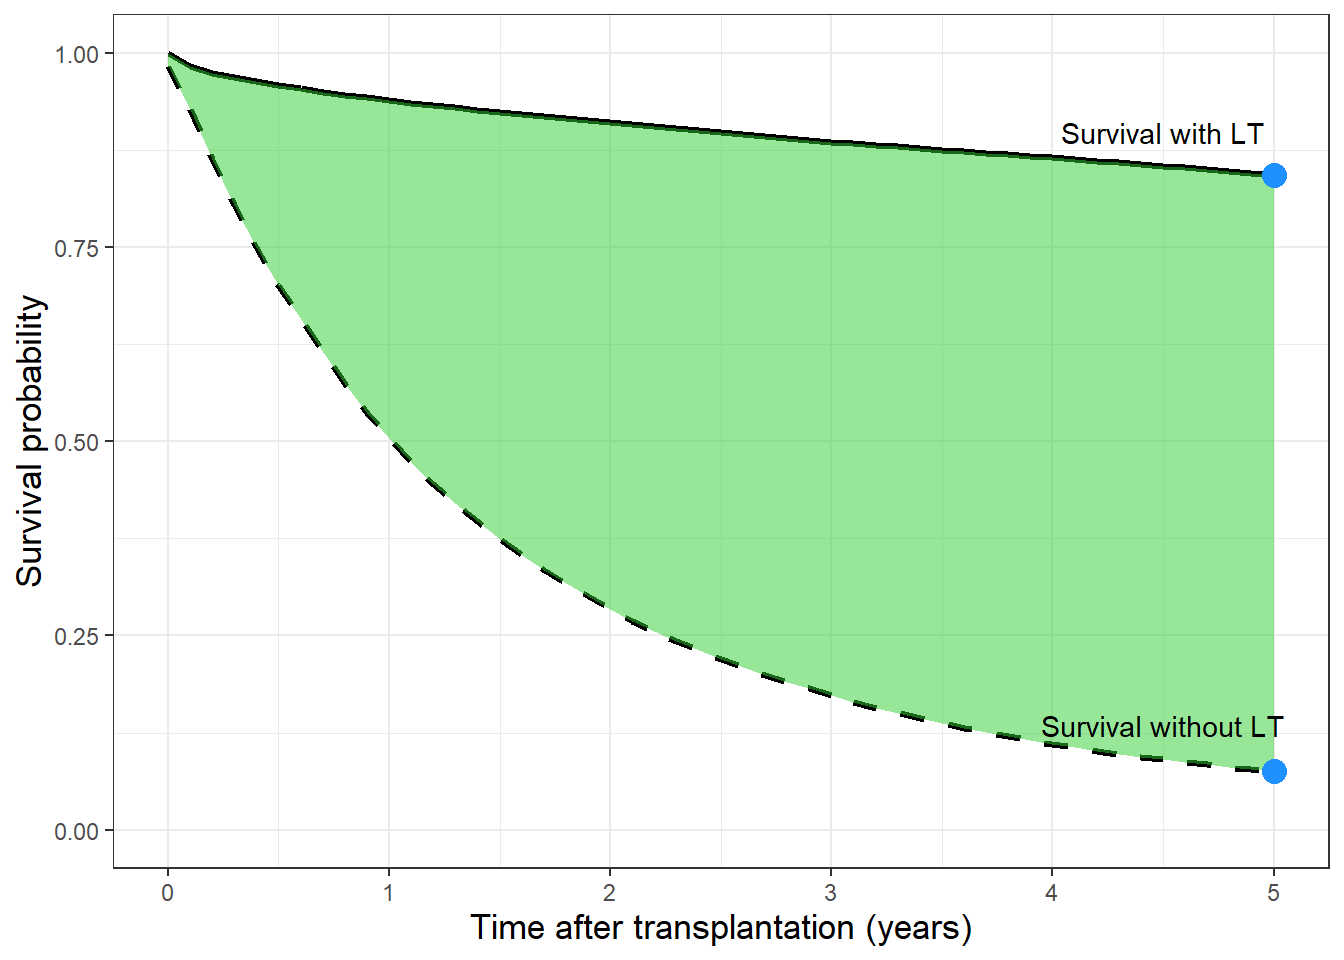 The survival with (solid line), without (dashed line) and benefit from transplantation (green area) are shown. In this example, survival is averaged for non-HCC patients with MELD-Na 25. Please note the difference in survival during five years (lines) and at five years (dots).